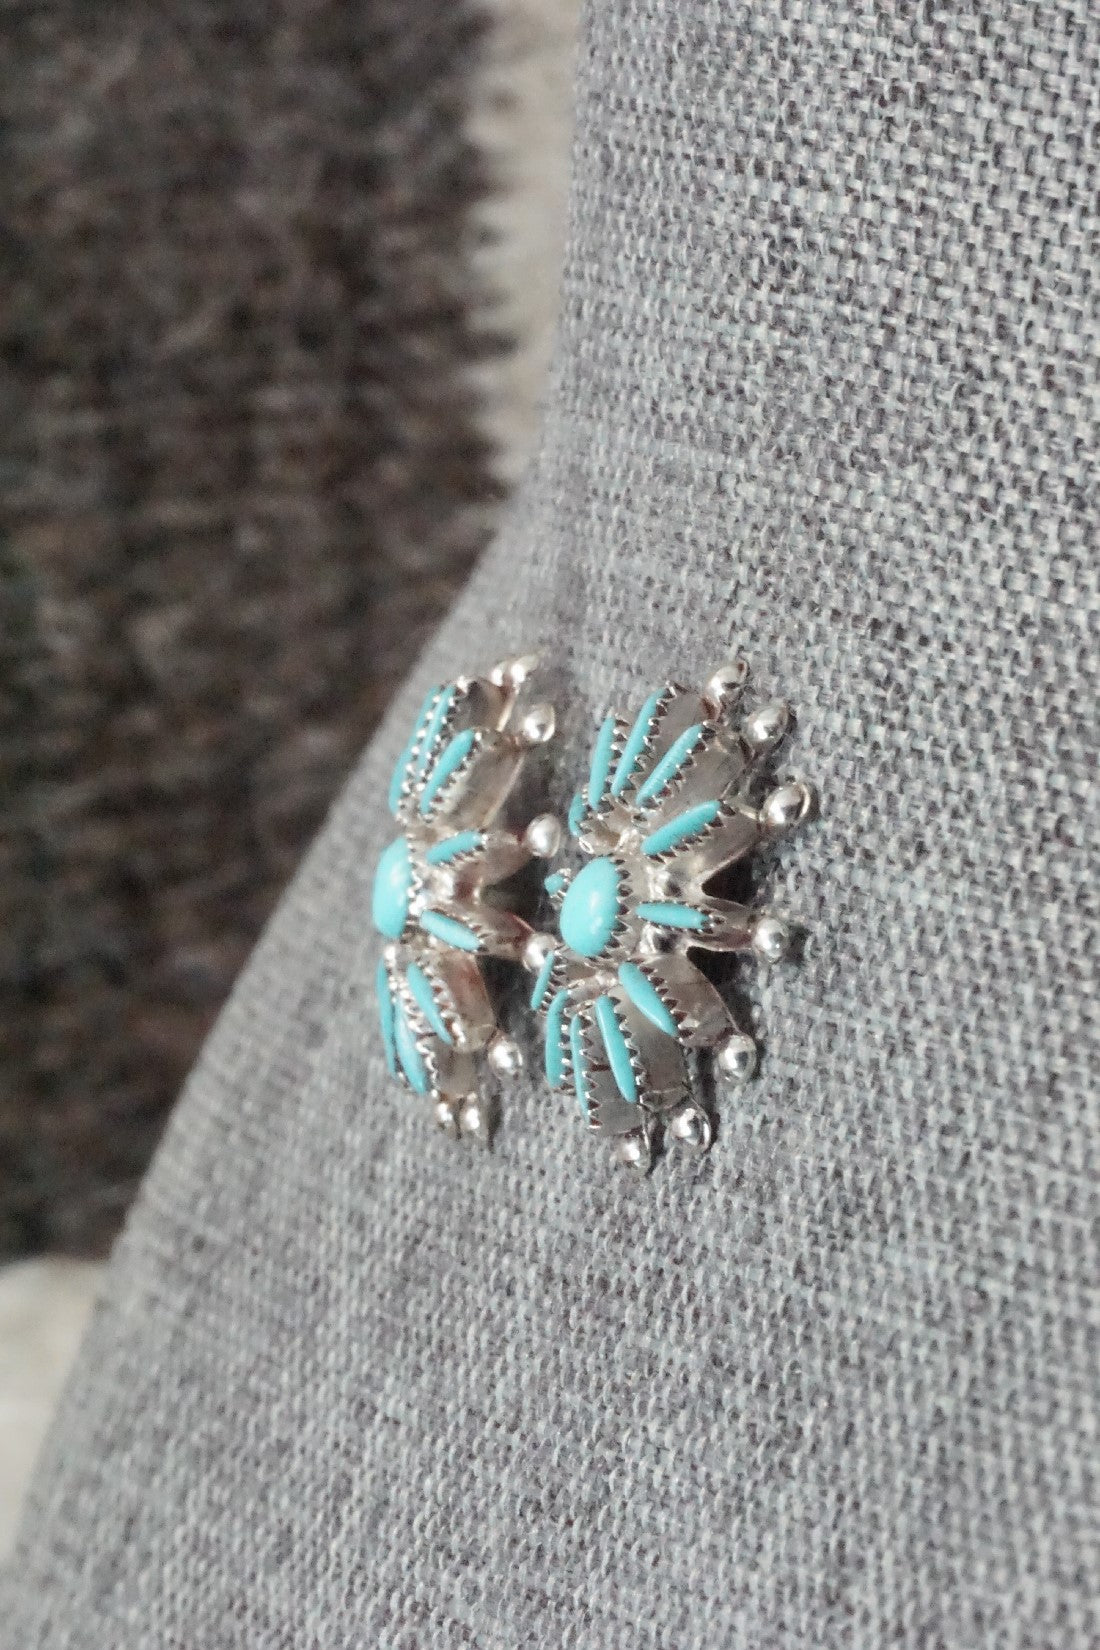 Turquoise & Sterling Silver Earrings - Rena Cachina